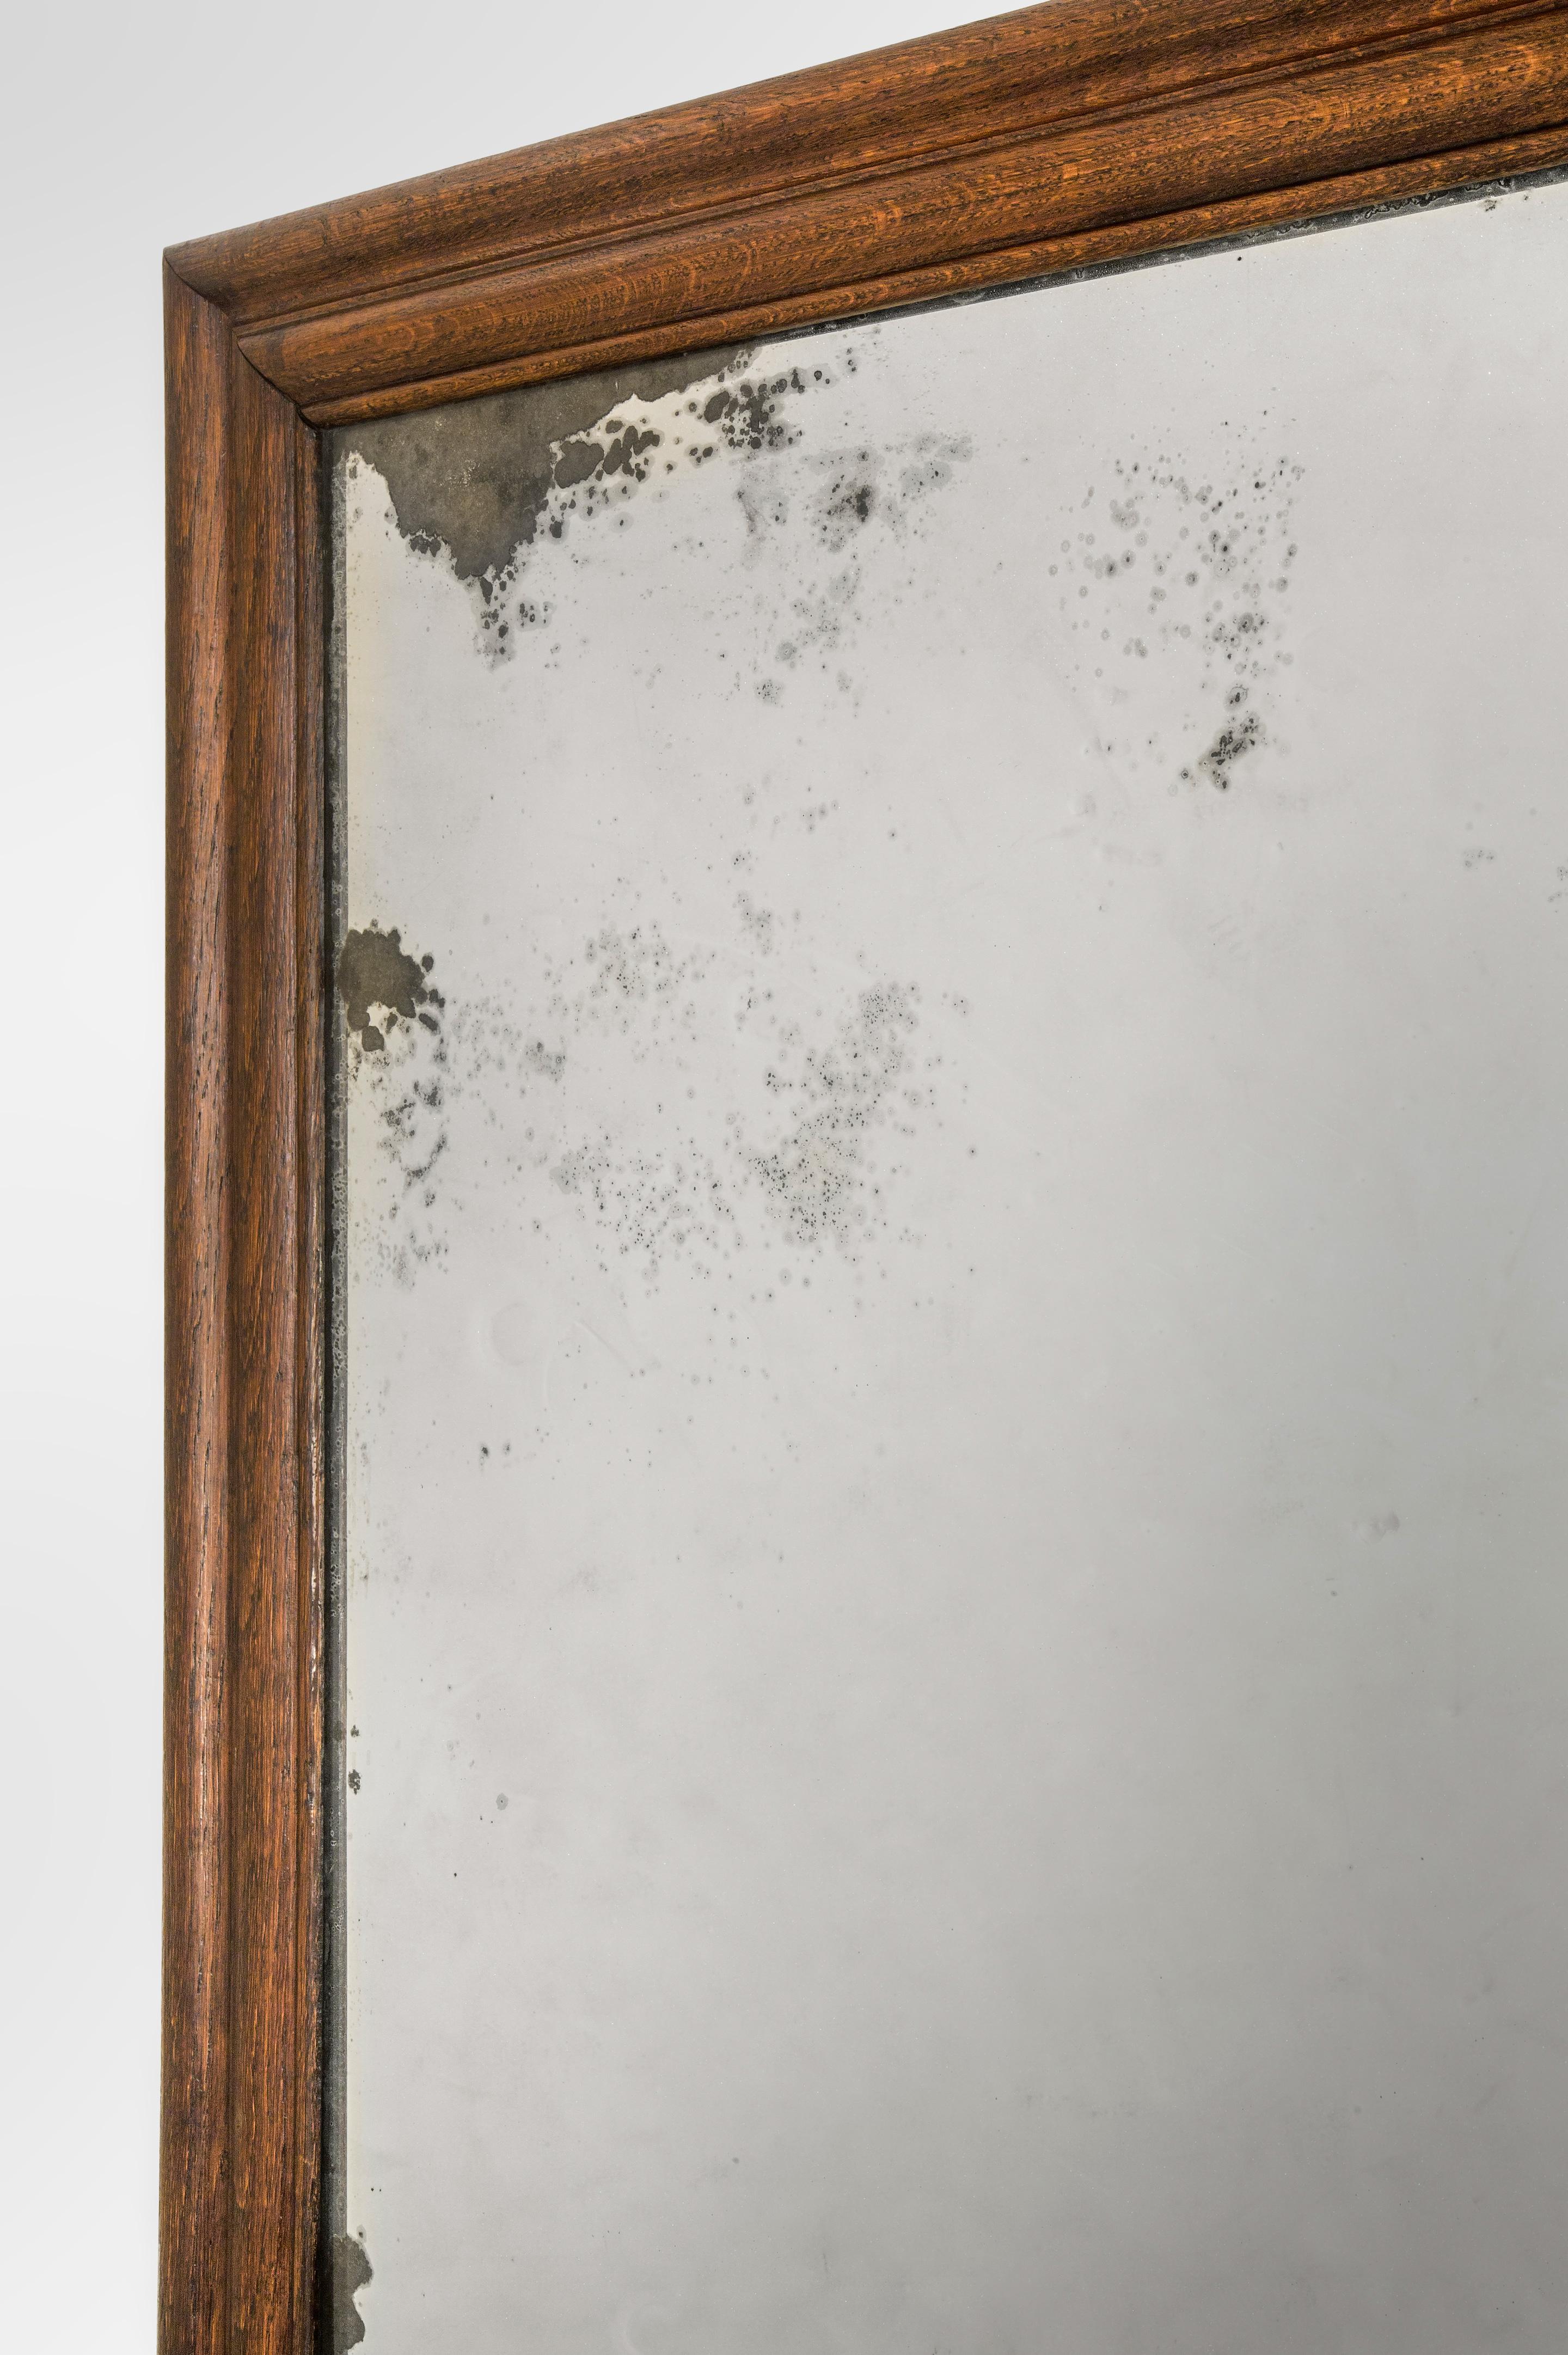 An English Large Oak Framed Mirror with Antique Glass
19th century
This unusually large mirror features a lovely period mirror glass that has the magical sparkle only achieved by glass that is more than century old. The beautifully aged mirror